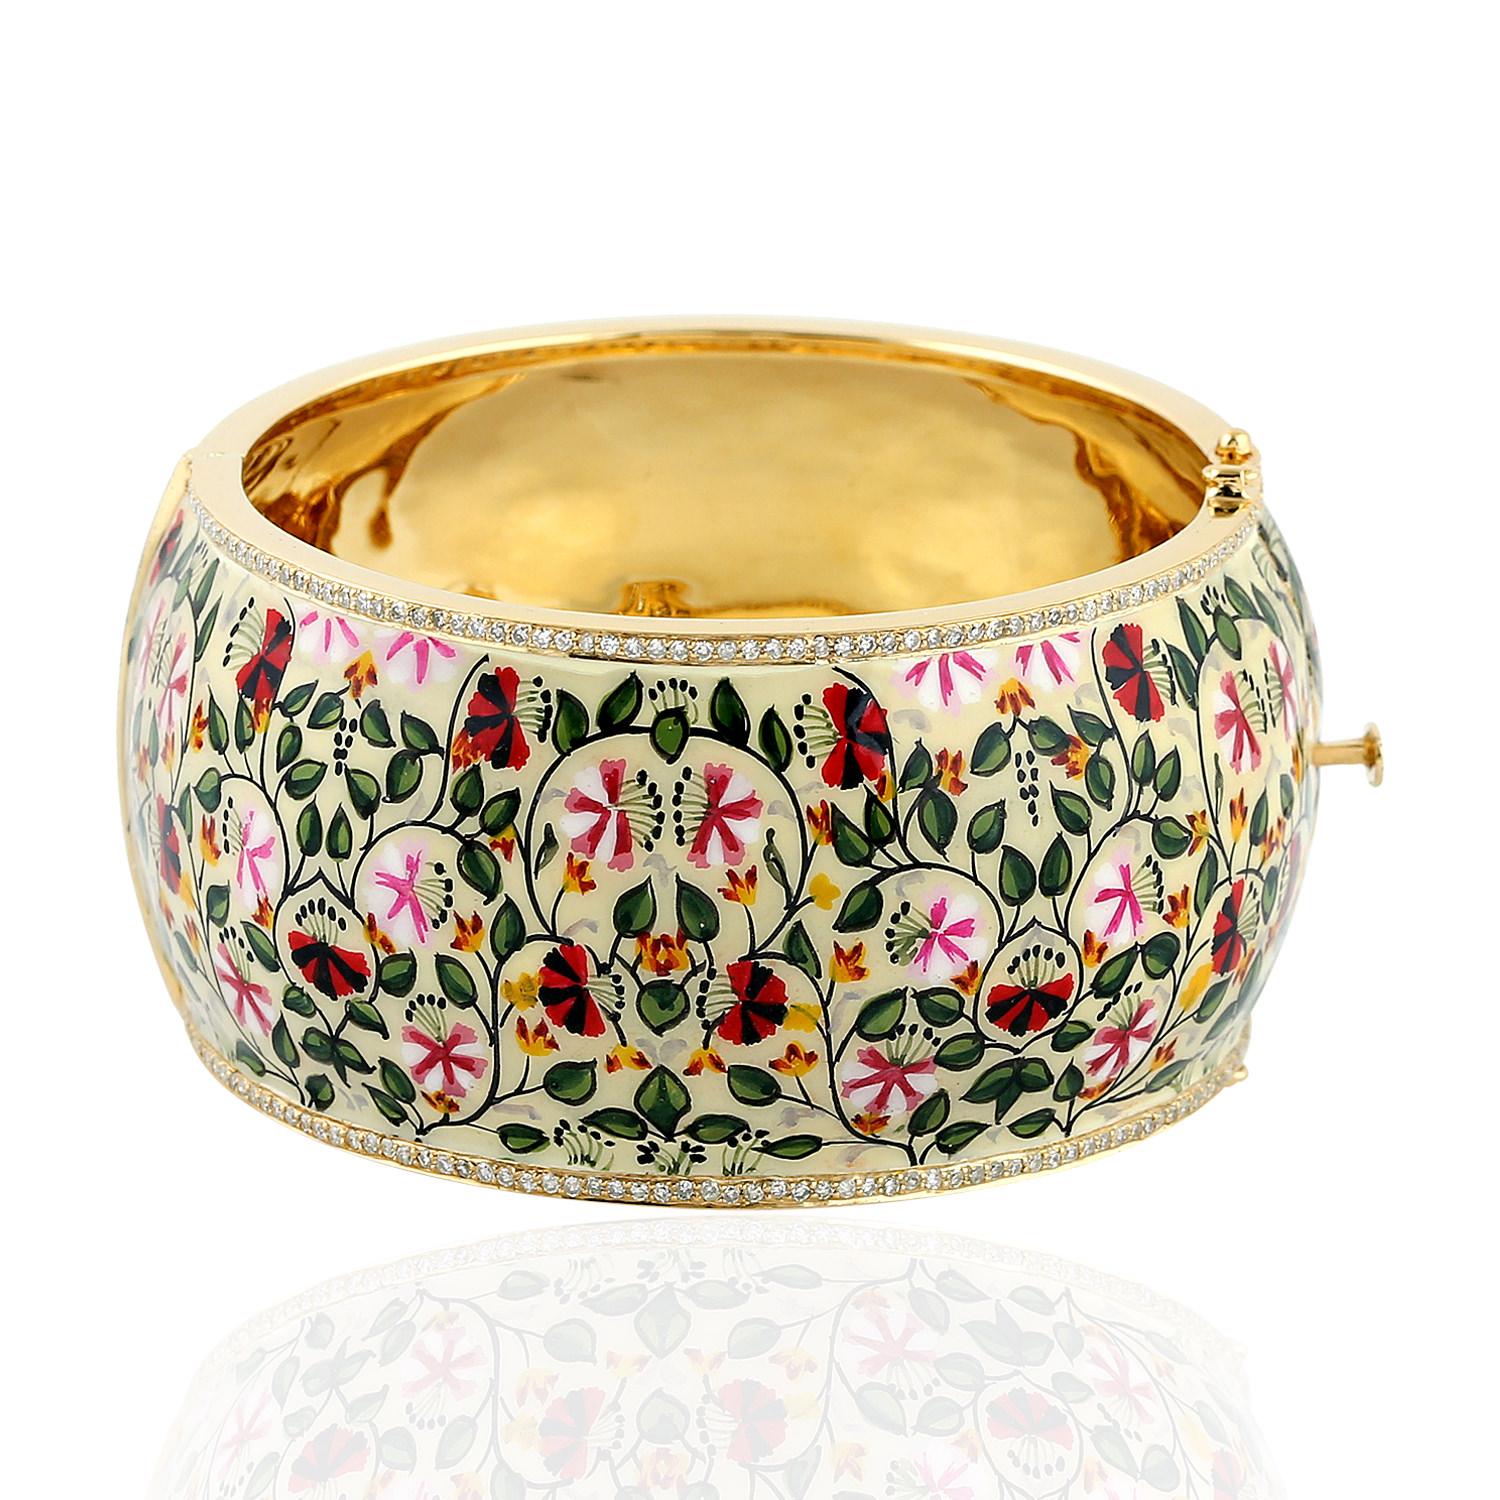 This Maharaja bracelet features unique hand painted miniature art set with 18K gold, sterling silver & 2.28 carats diamonds.  This beautiful bangle is filled with intricate floral art in ivory, red & green leaves. Clasp closure.

FOLLOW  MEGHNA